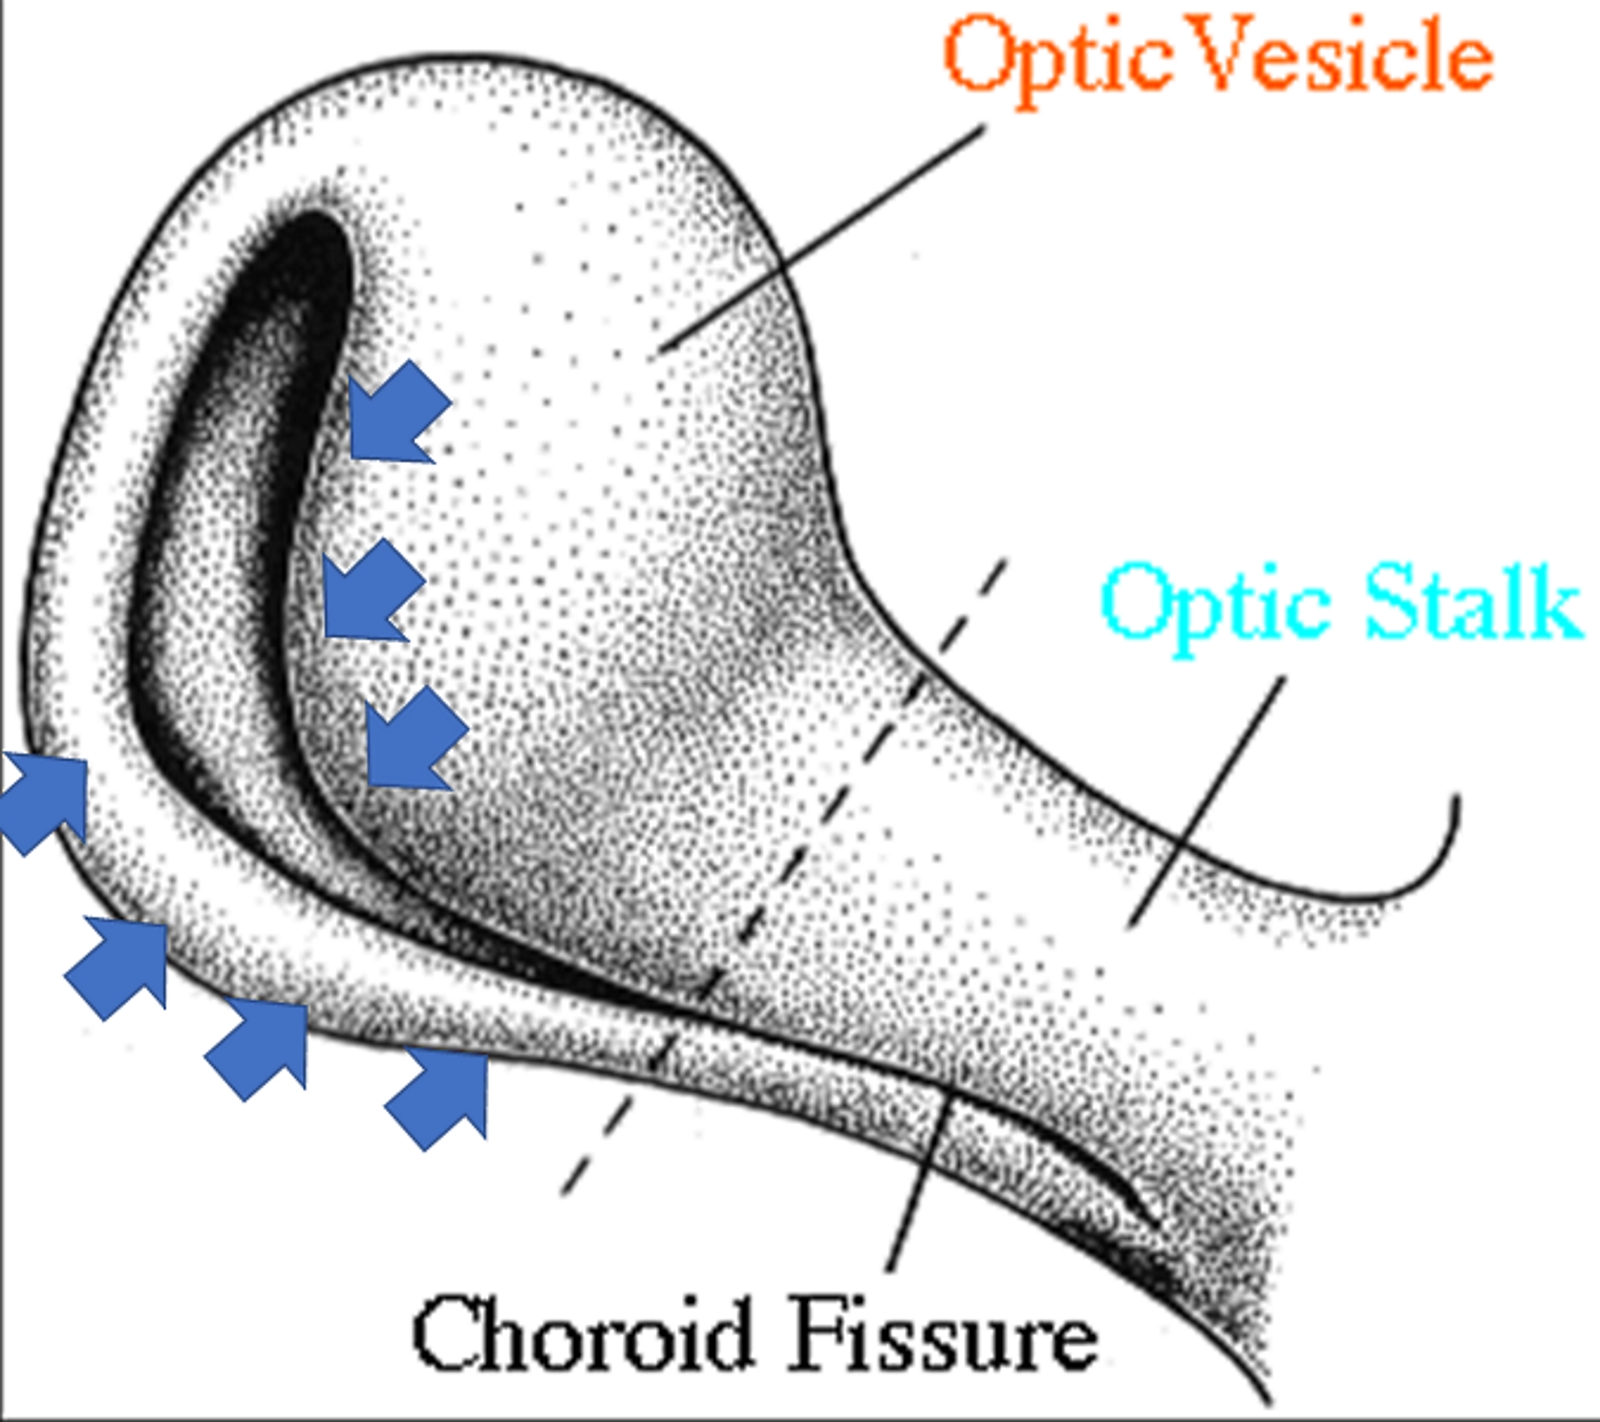 The figure shows the invagination process of the optic stalk and the optic vesicle, with the formation of the choroid fissure (inferiorly)